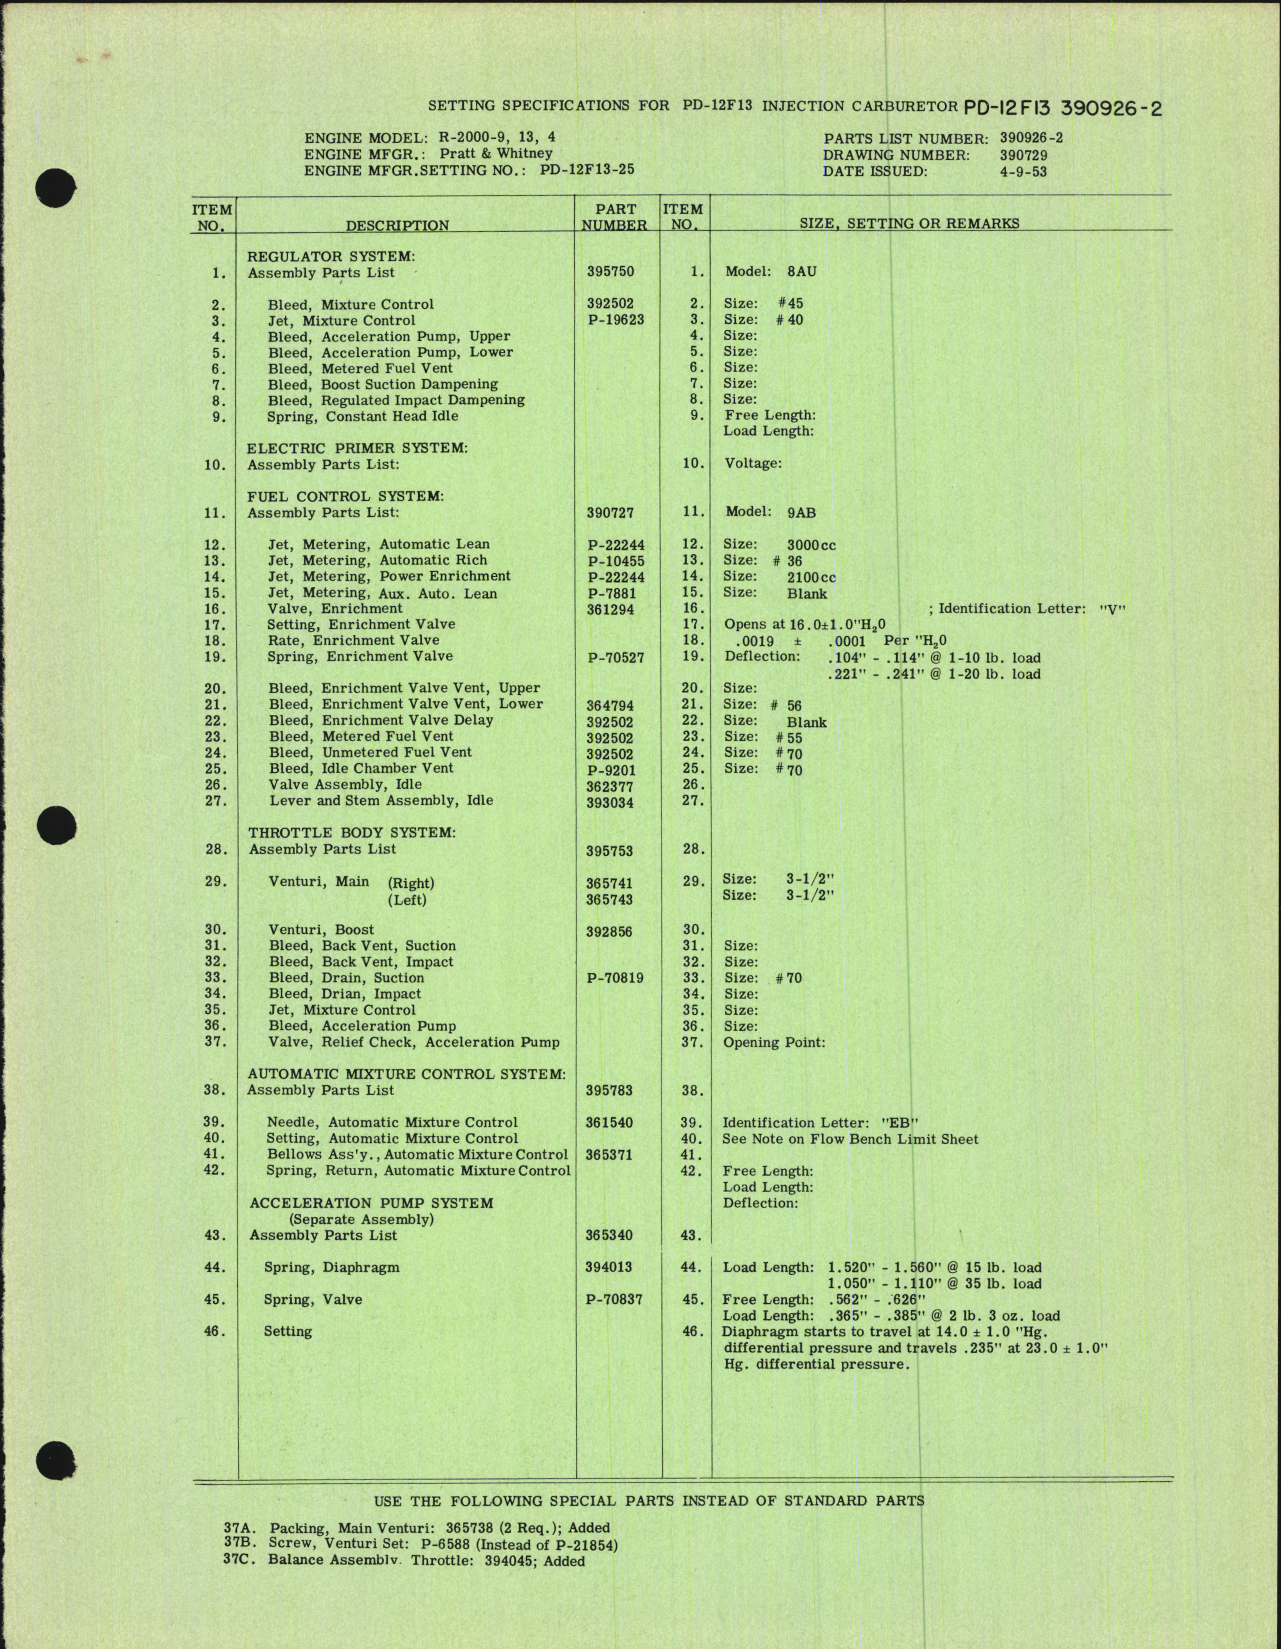 Sample page 8 from AirCorps Library document: Setting Specifications for Stromberg Injection Carburetor Model PD-12F13